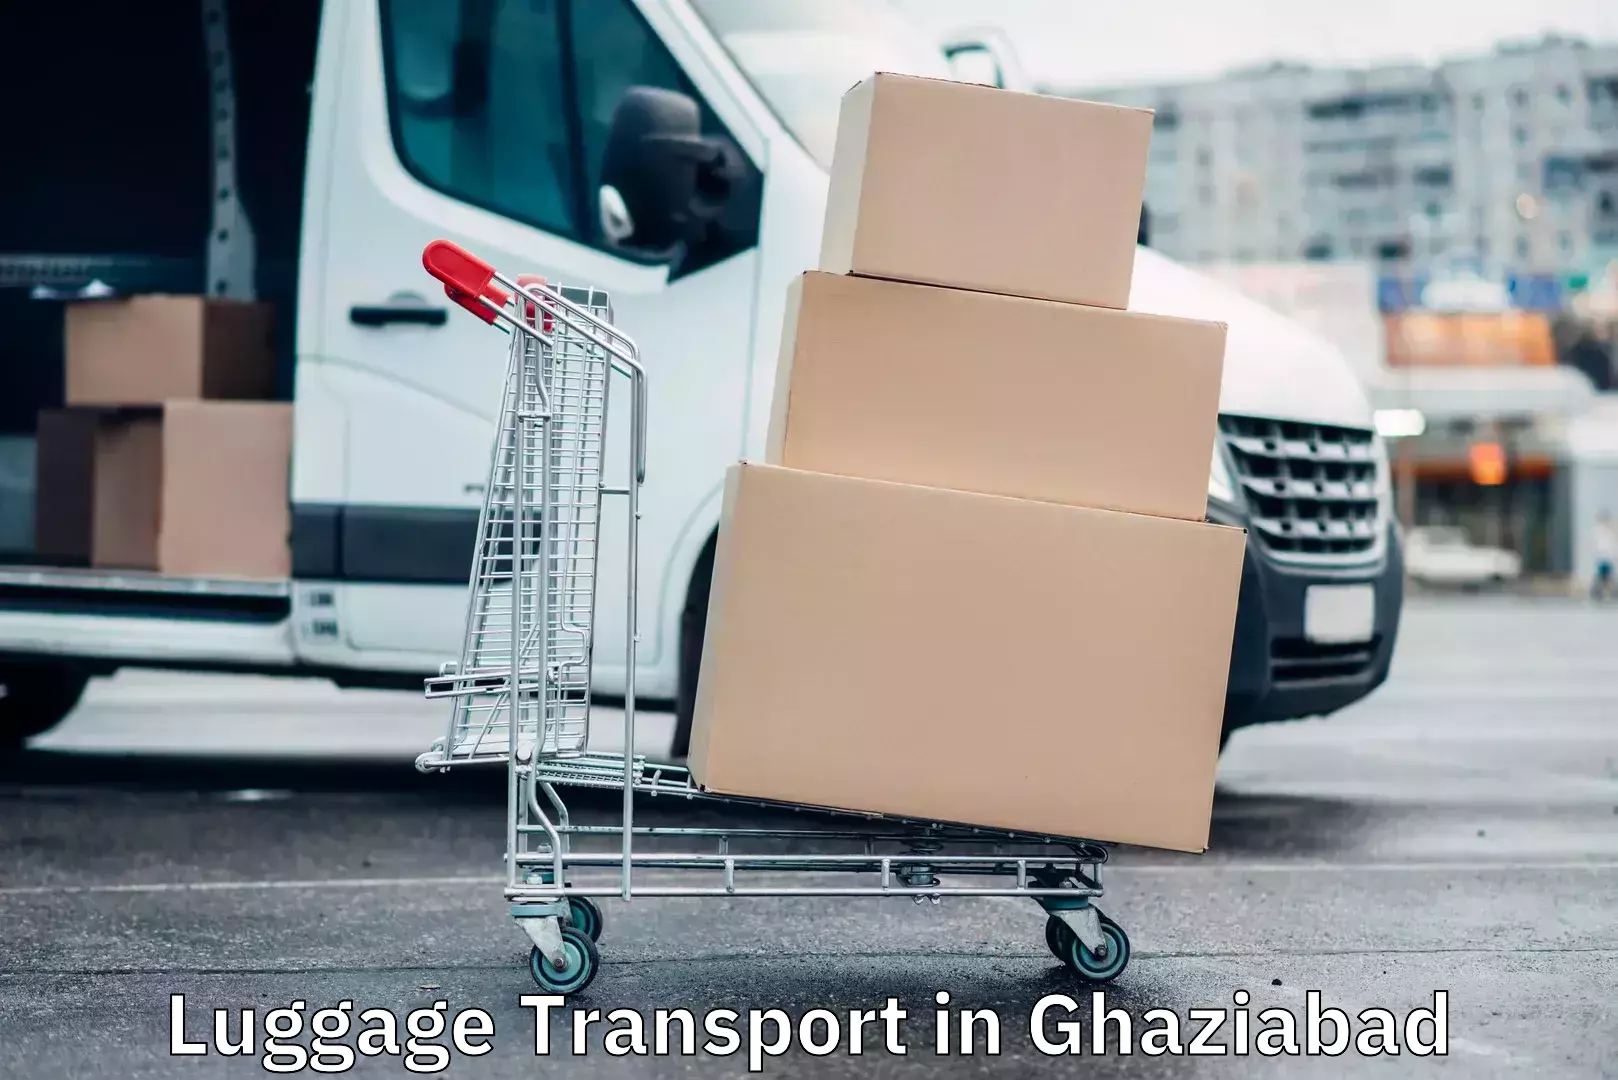 Luggage shipping consultation in Ghaziabad